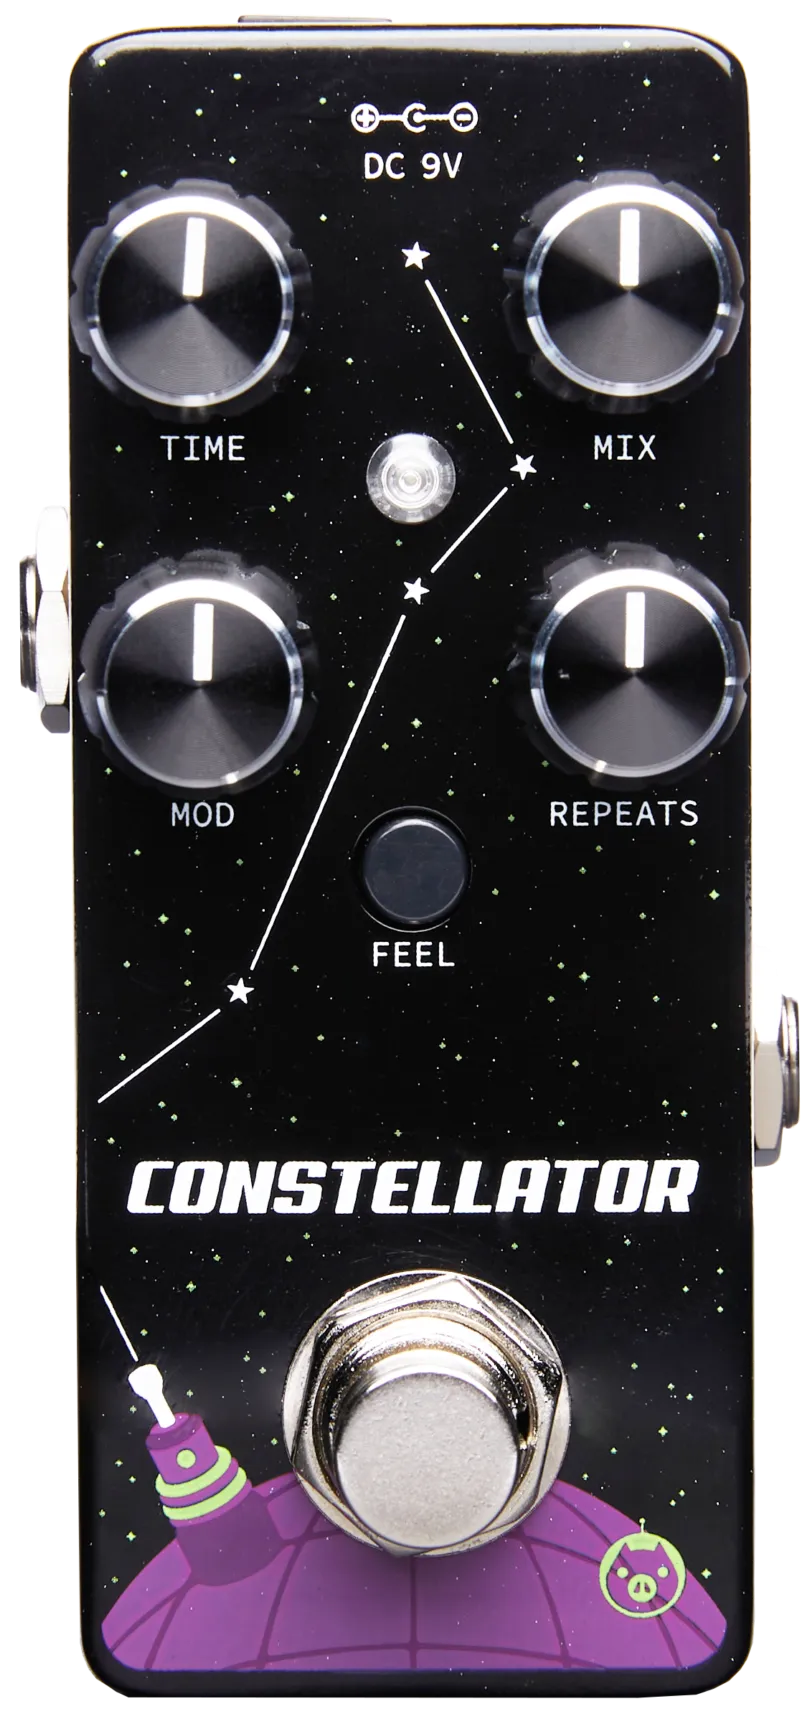 Constellator Guitar Pedal By Pigtronix